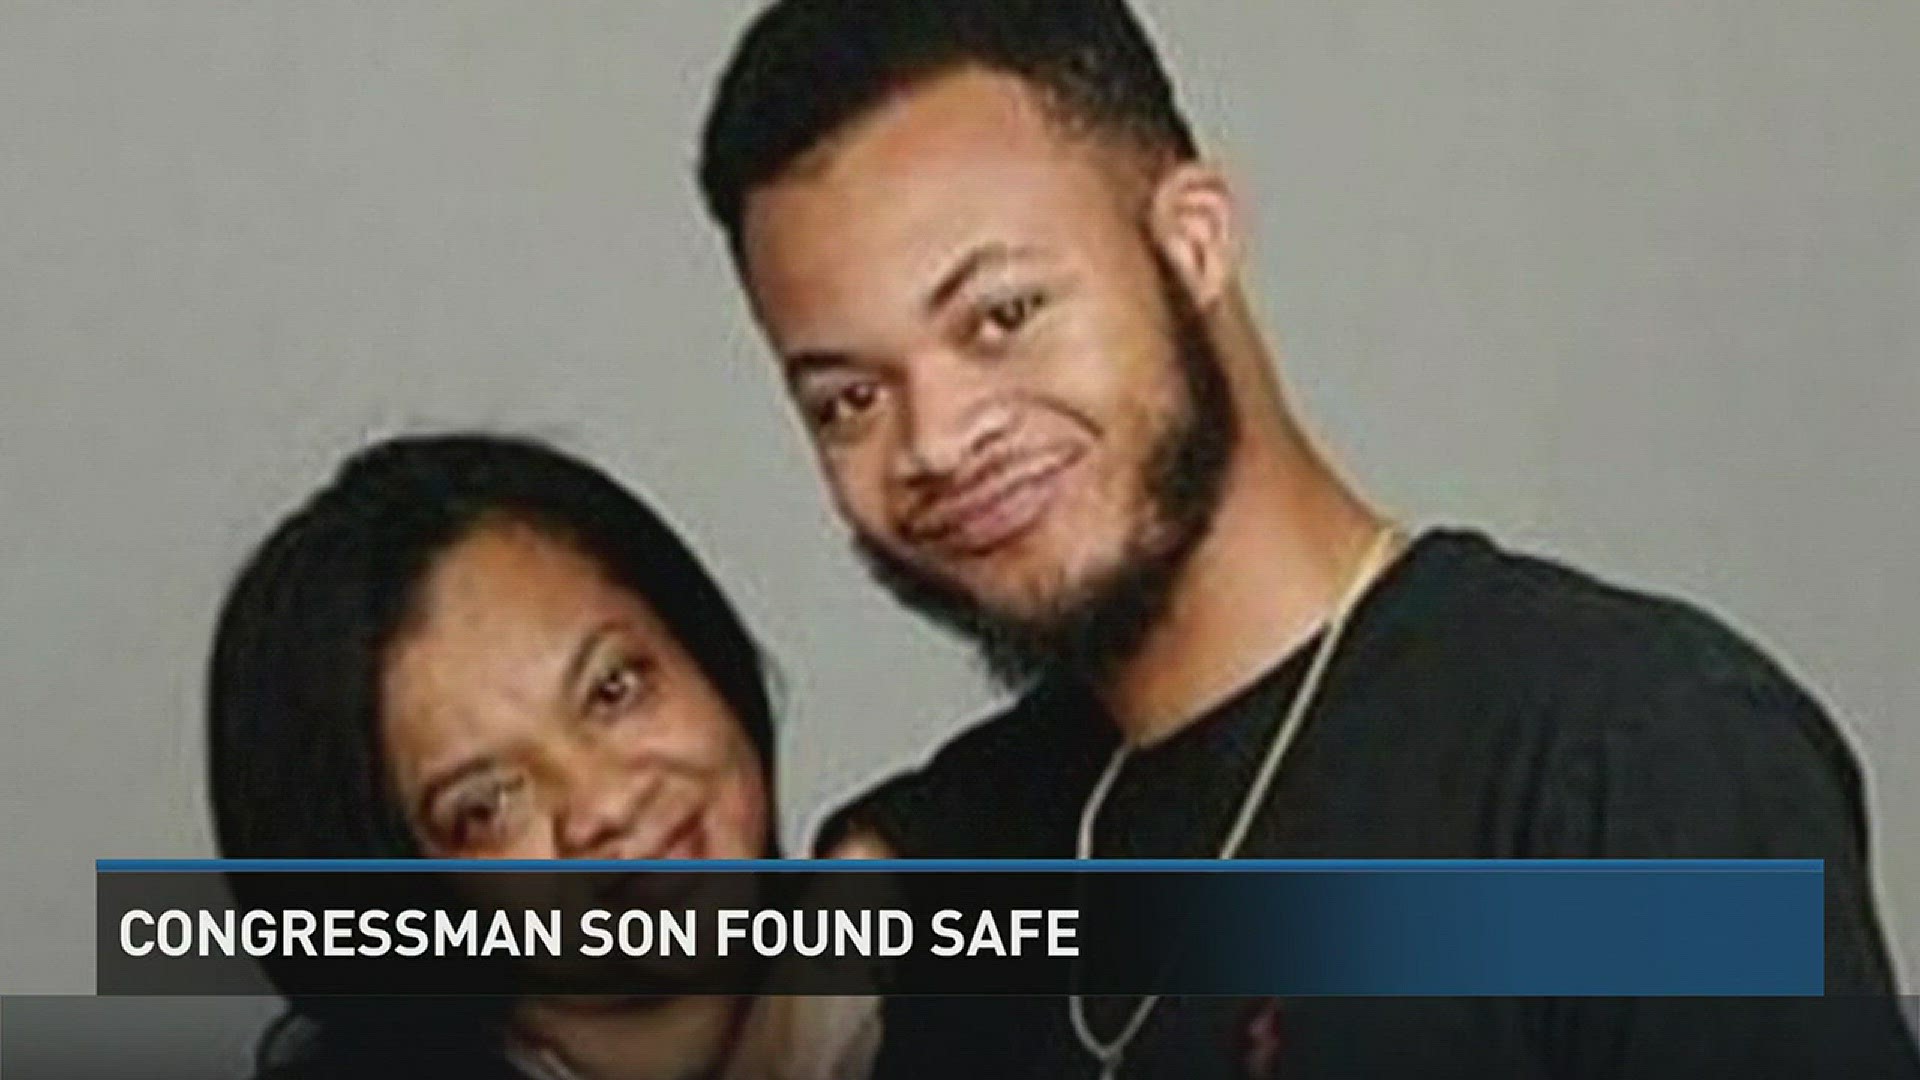 Houston Police say Carl Conyers, the son of U.S. Representative John Conyers, was found safe after being reporter missing.